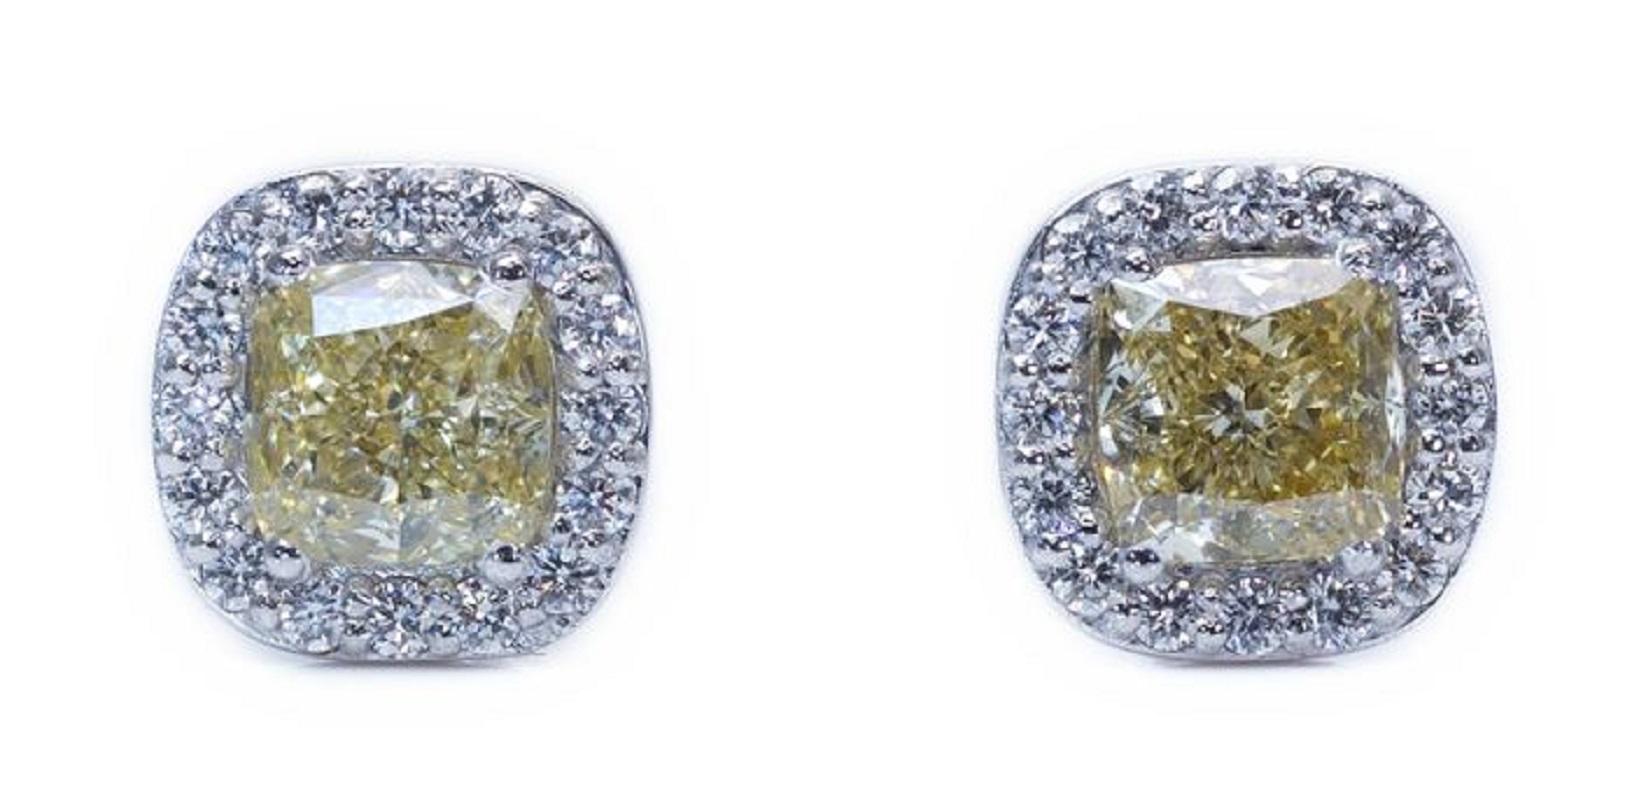 Beautiful 18k White Gold Halo Earrings with 2.96 Ct Natural Diamonds, GIA Cert 1